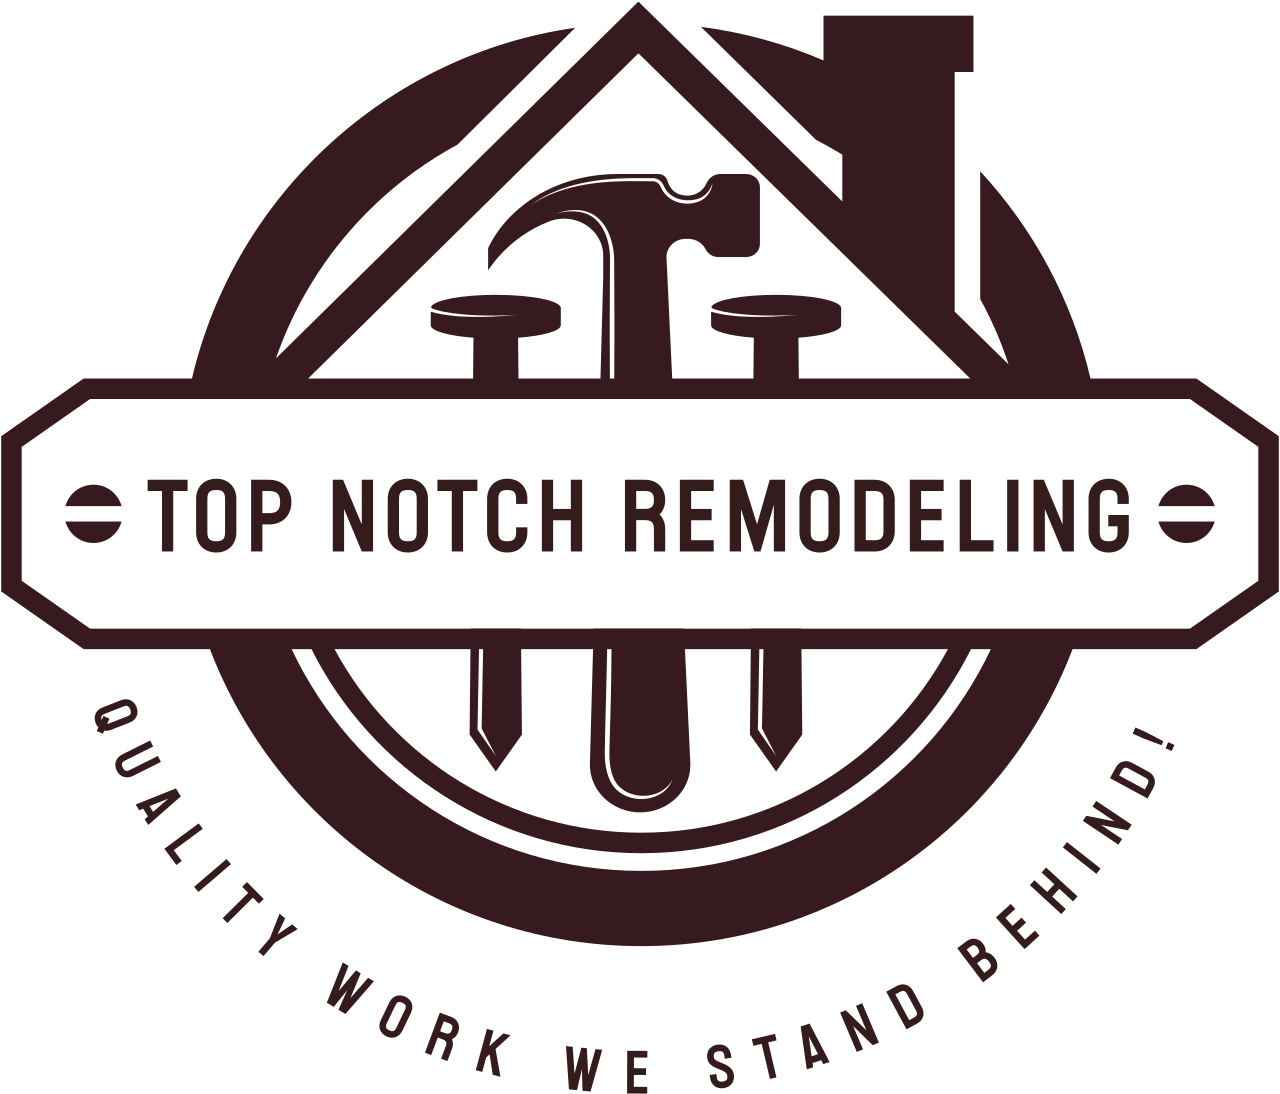 Top Notch Remodeling's web page